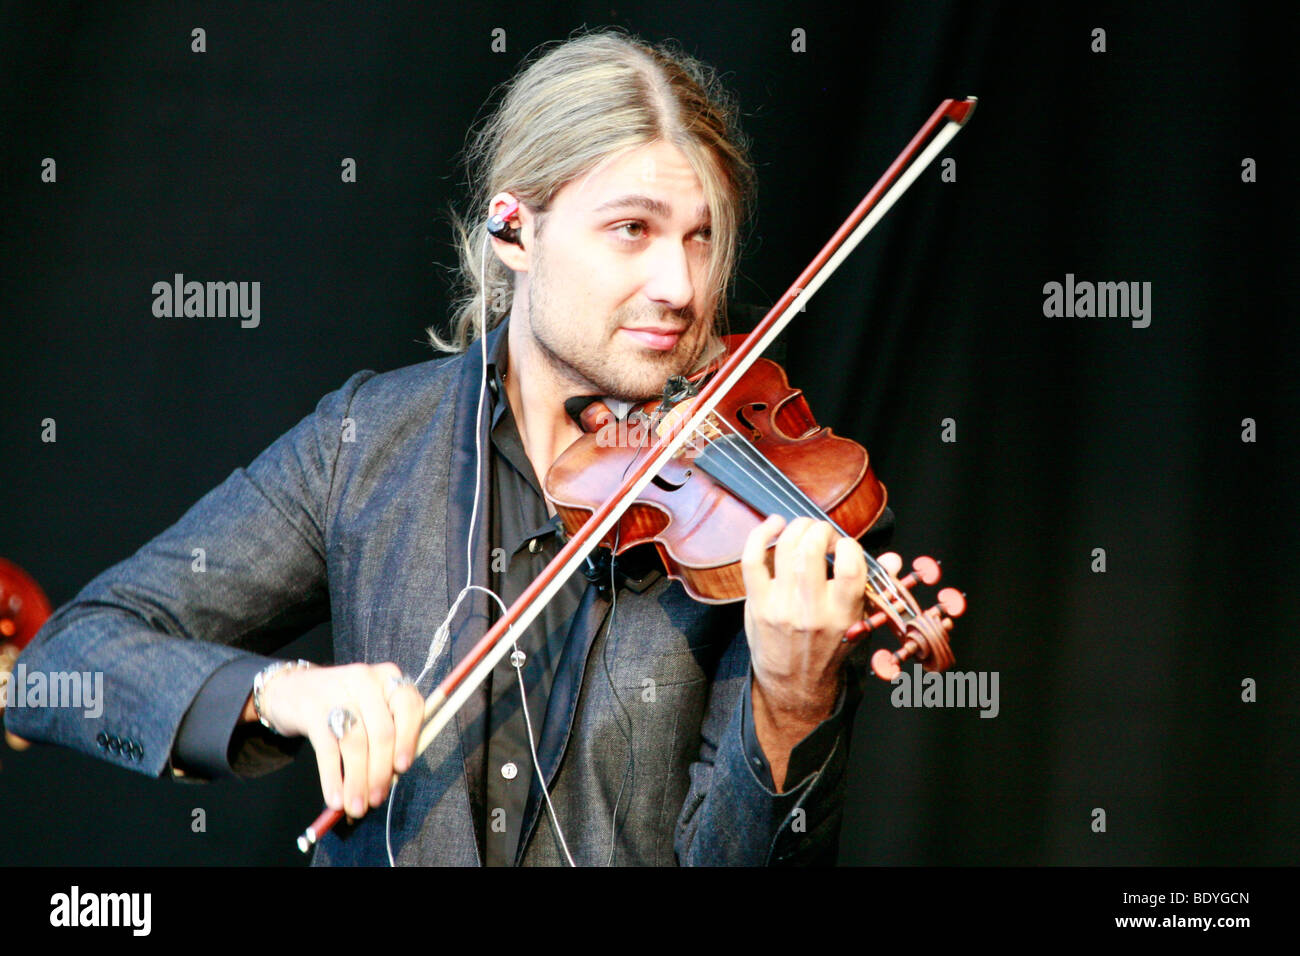 Star violinist David Garrett live at the movie nights at the bank of the river Elbe in Dresden, Saxony, Germany, Europe Stock Photo